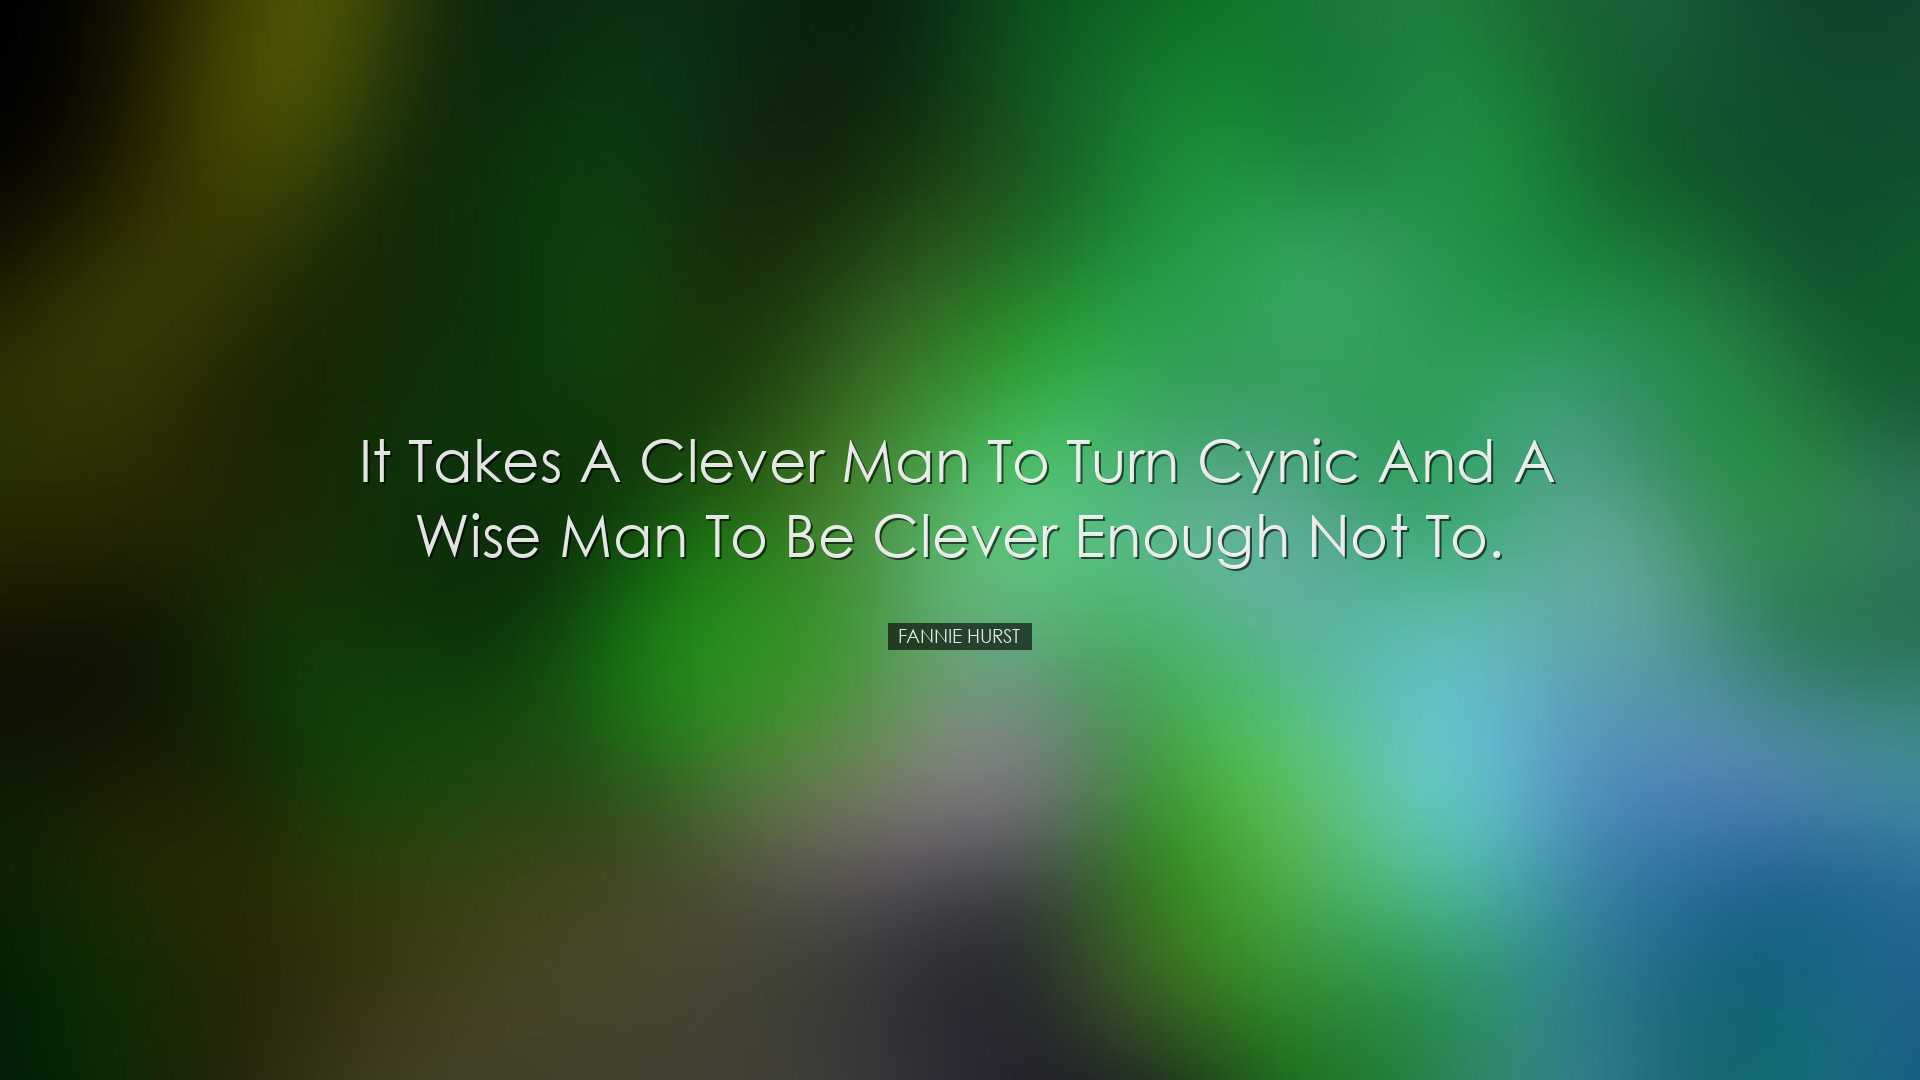 It takes a clever man to turn cynic and a wise man to be clever en